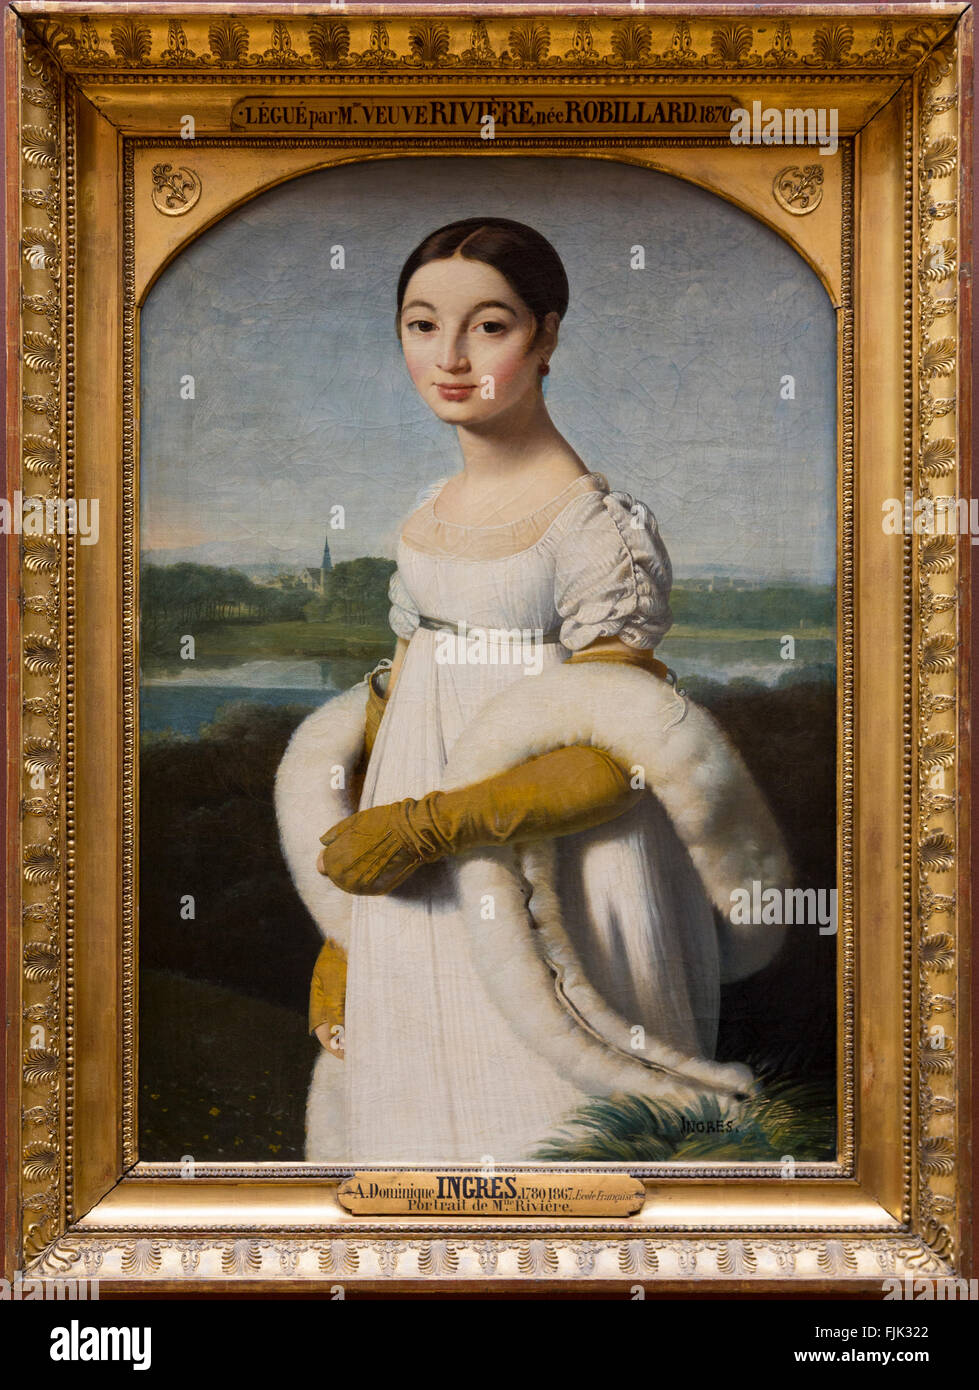 Oil painting 'Portrait of Mademoiselle Rivière' by Dominique Ingres displayed in a gilded frame, Louvre Museum, Paris, France Stock Photo